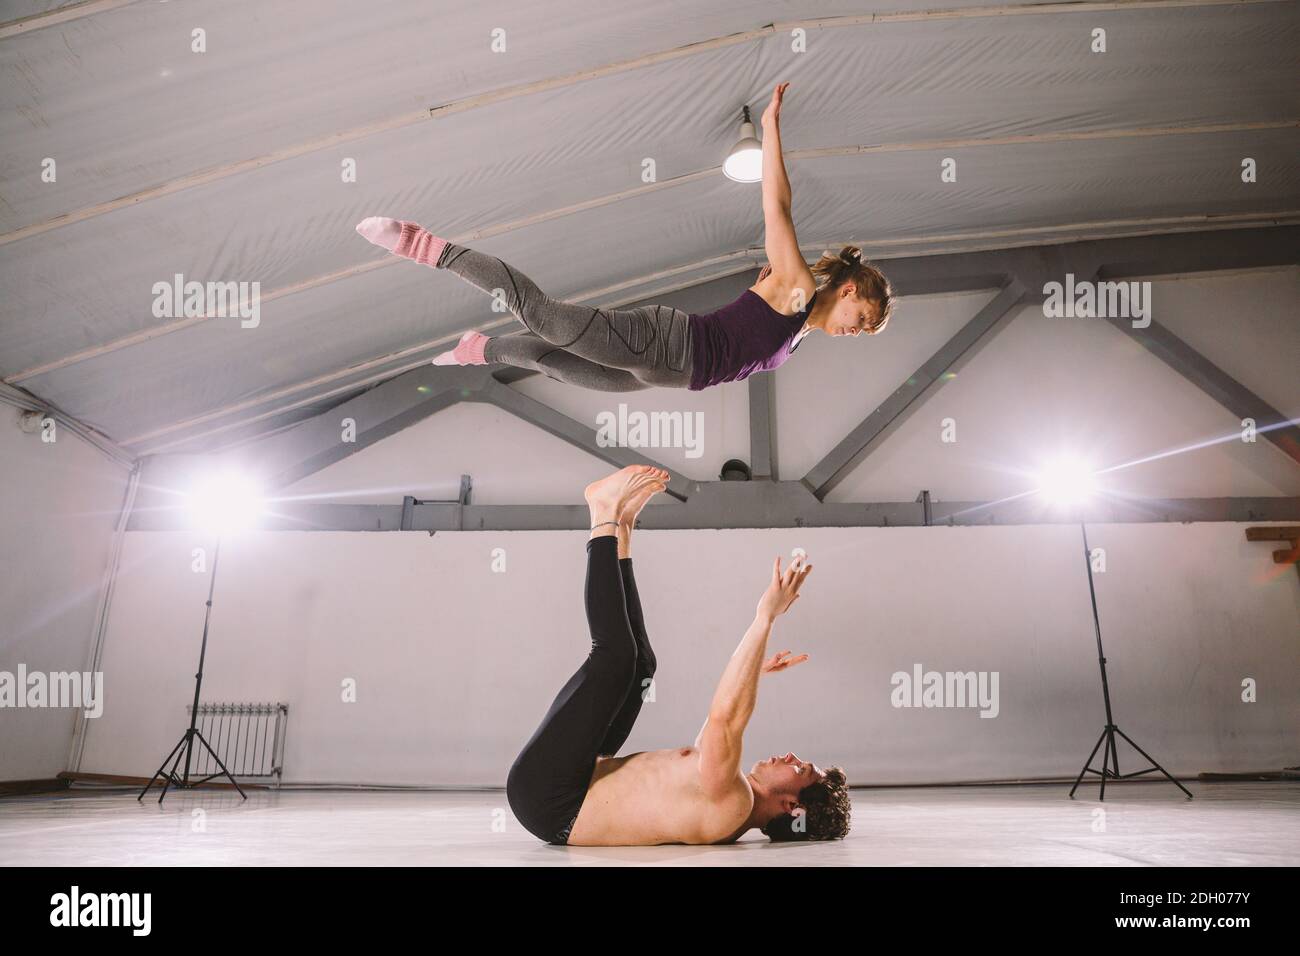 Two athletes performing duo acroyoga poses Stock Photo by Photology75